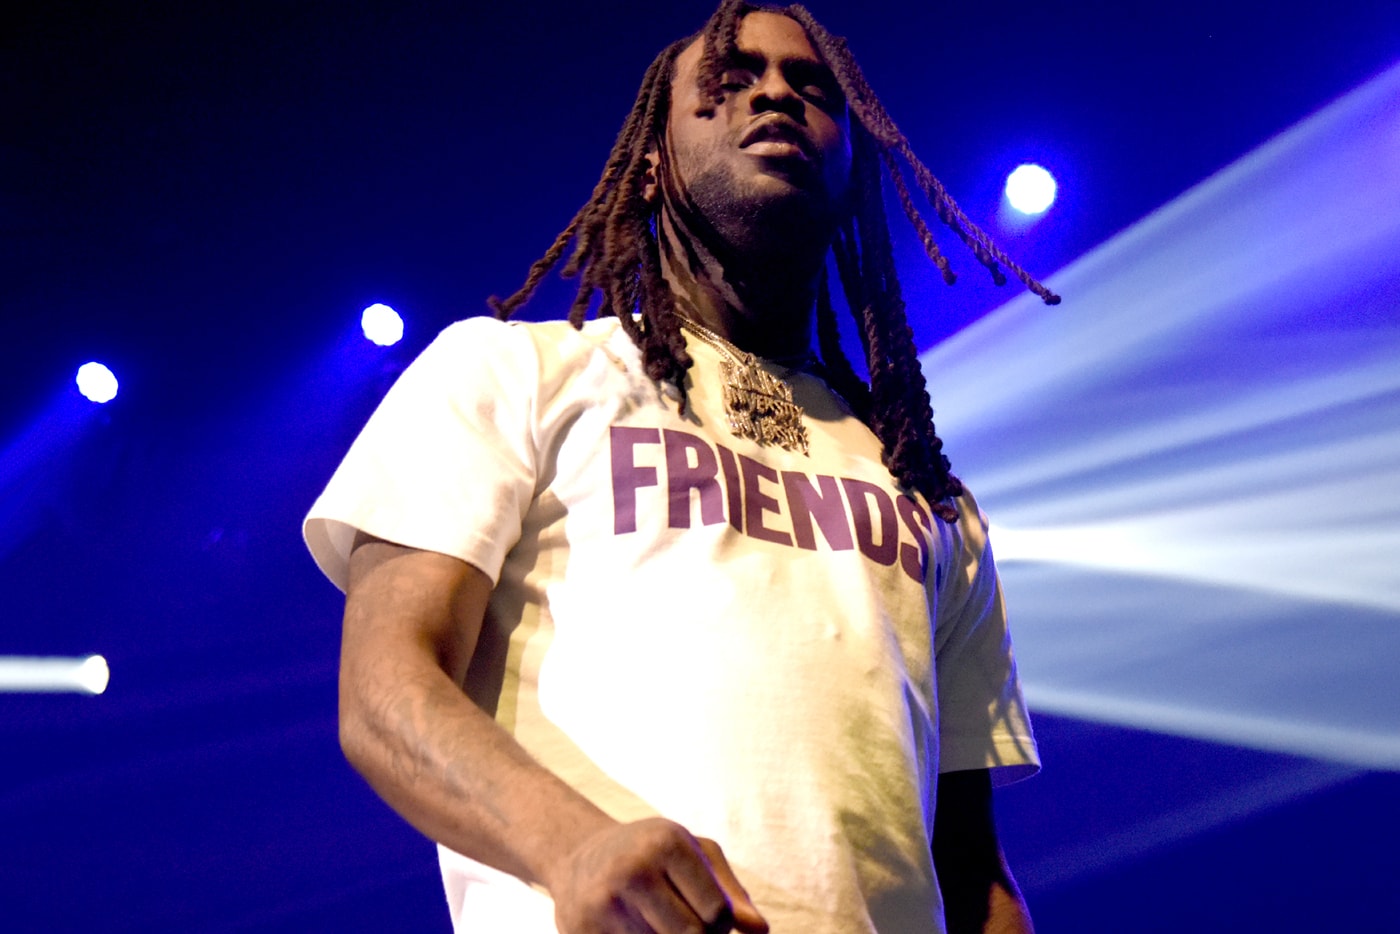 Chief Keef Tells 1.1 Million Twitter Followers to Vandalize Minneapolis Home